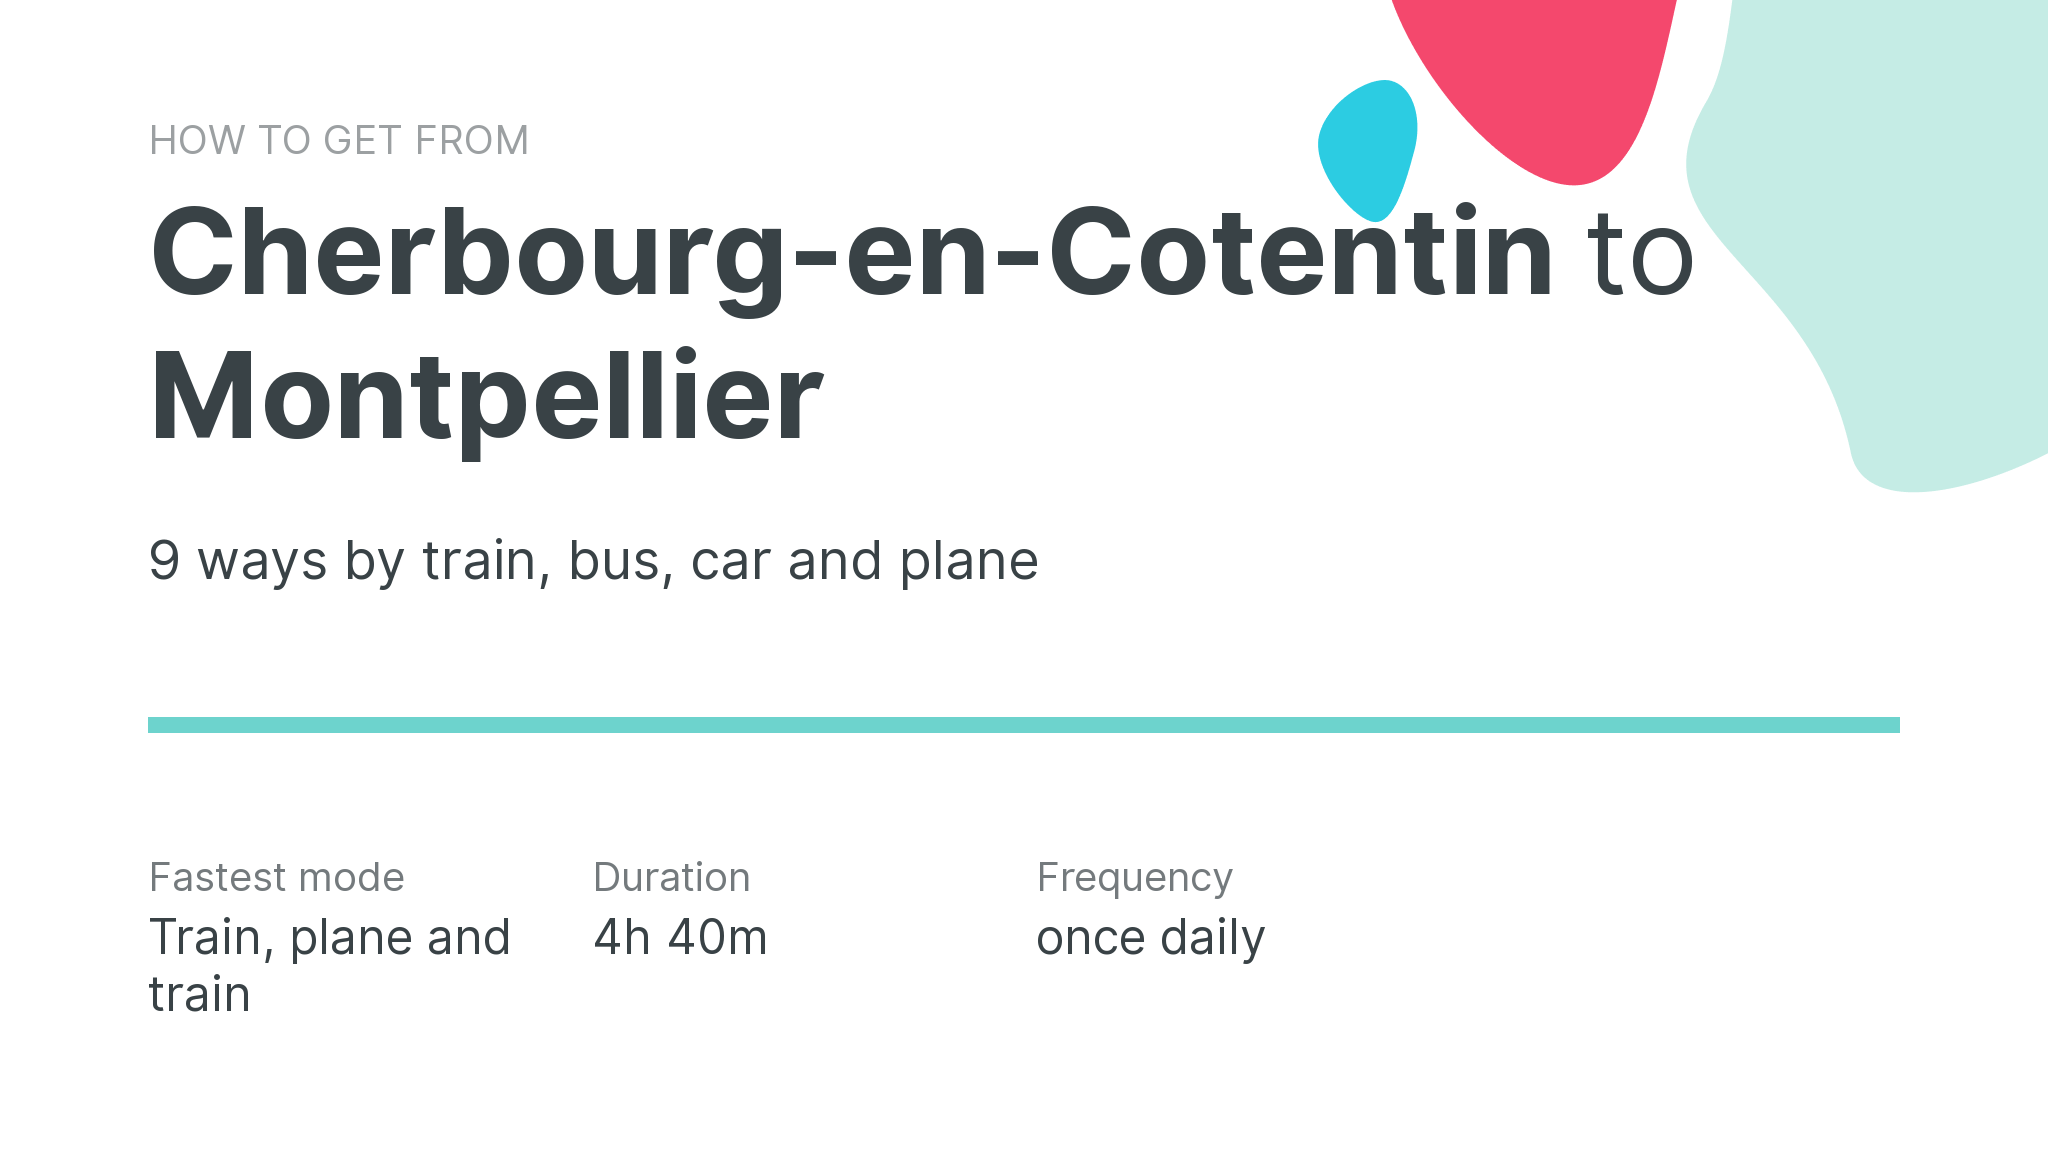 How do I get from Cherbourg-en-Cotentin to Montpellier